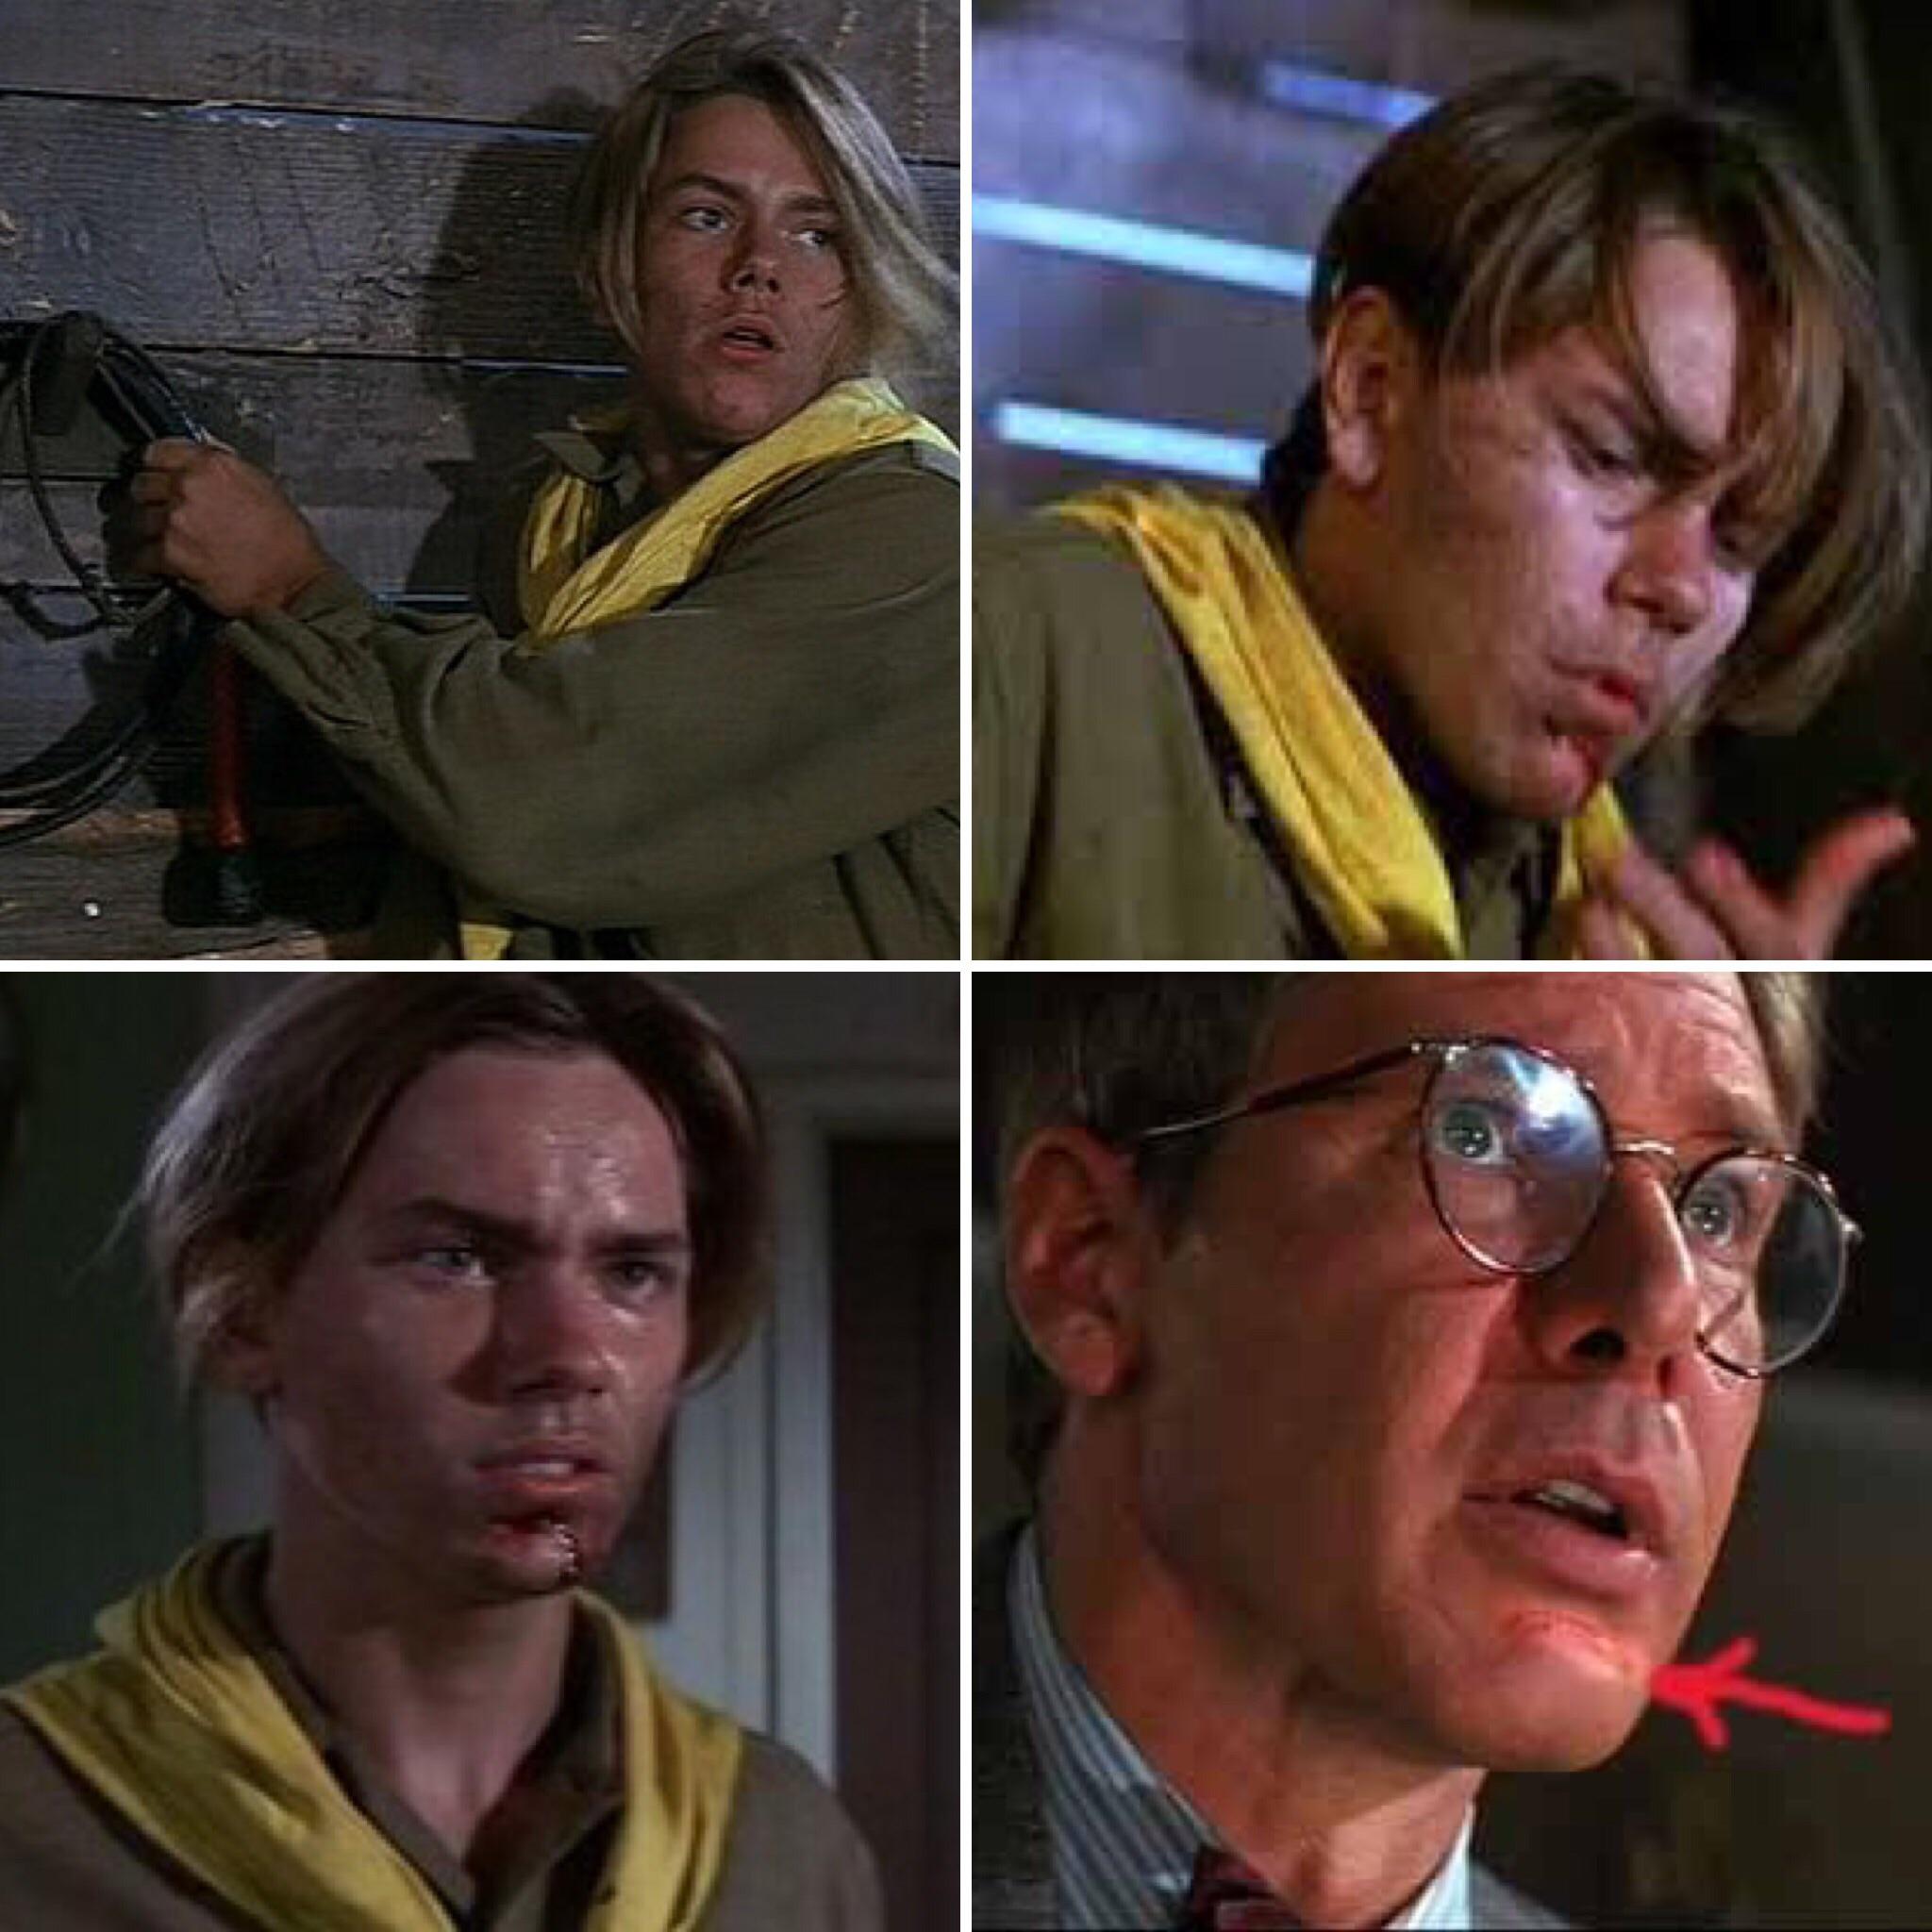 In Indiana Jones and the Last Crusade, a young Indy cracks the whip to defend himself against a lion and accidentally lashes his chin. This is meant to account for a scar on Harrison Ford’s chin, which was left from a car accident years prior to making the film